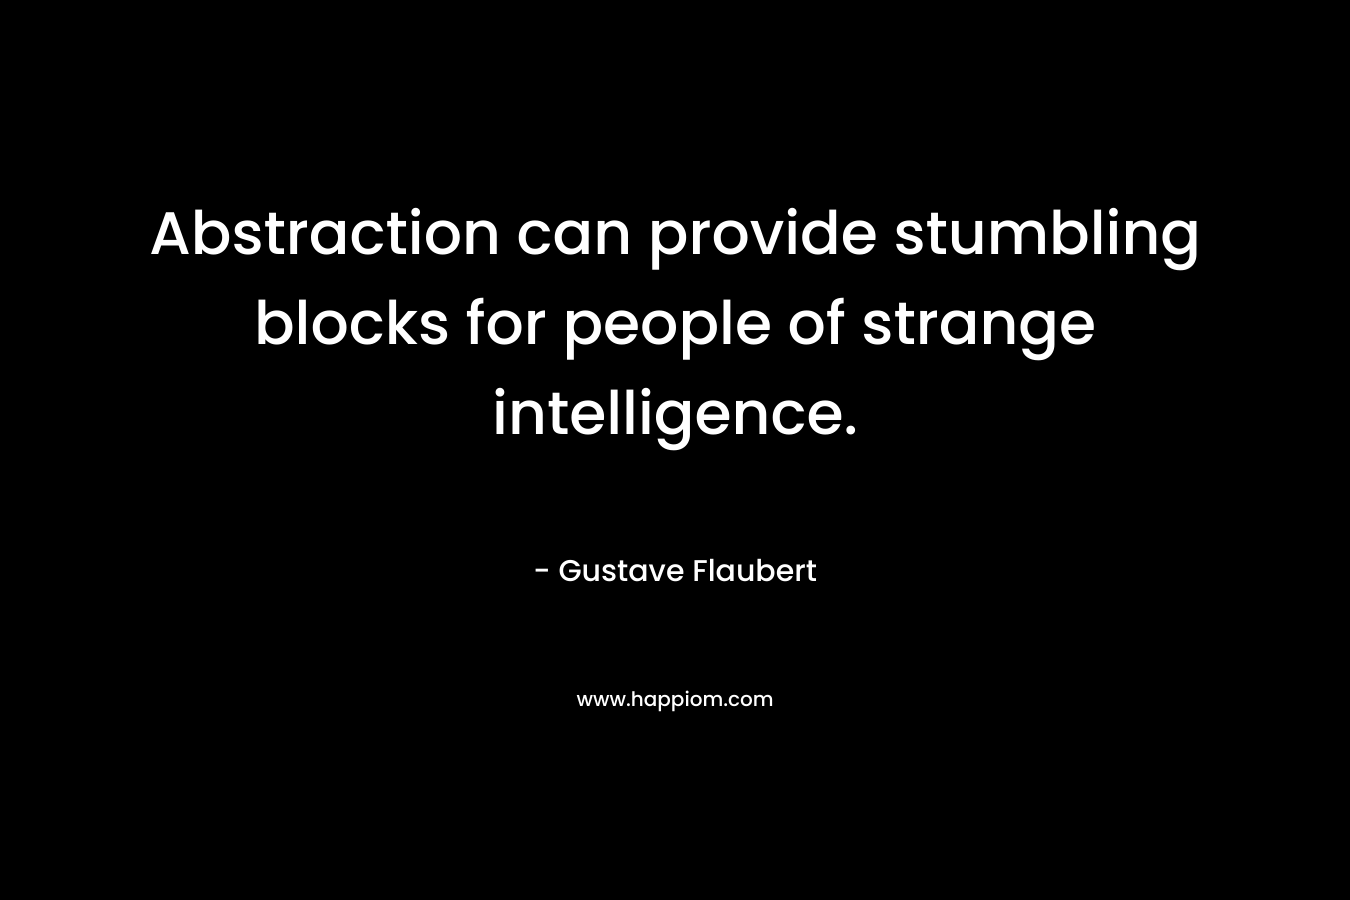 Abstraction can provide stumbling blocks for people of strange intelligence. – Gustave Flaubert